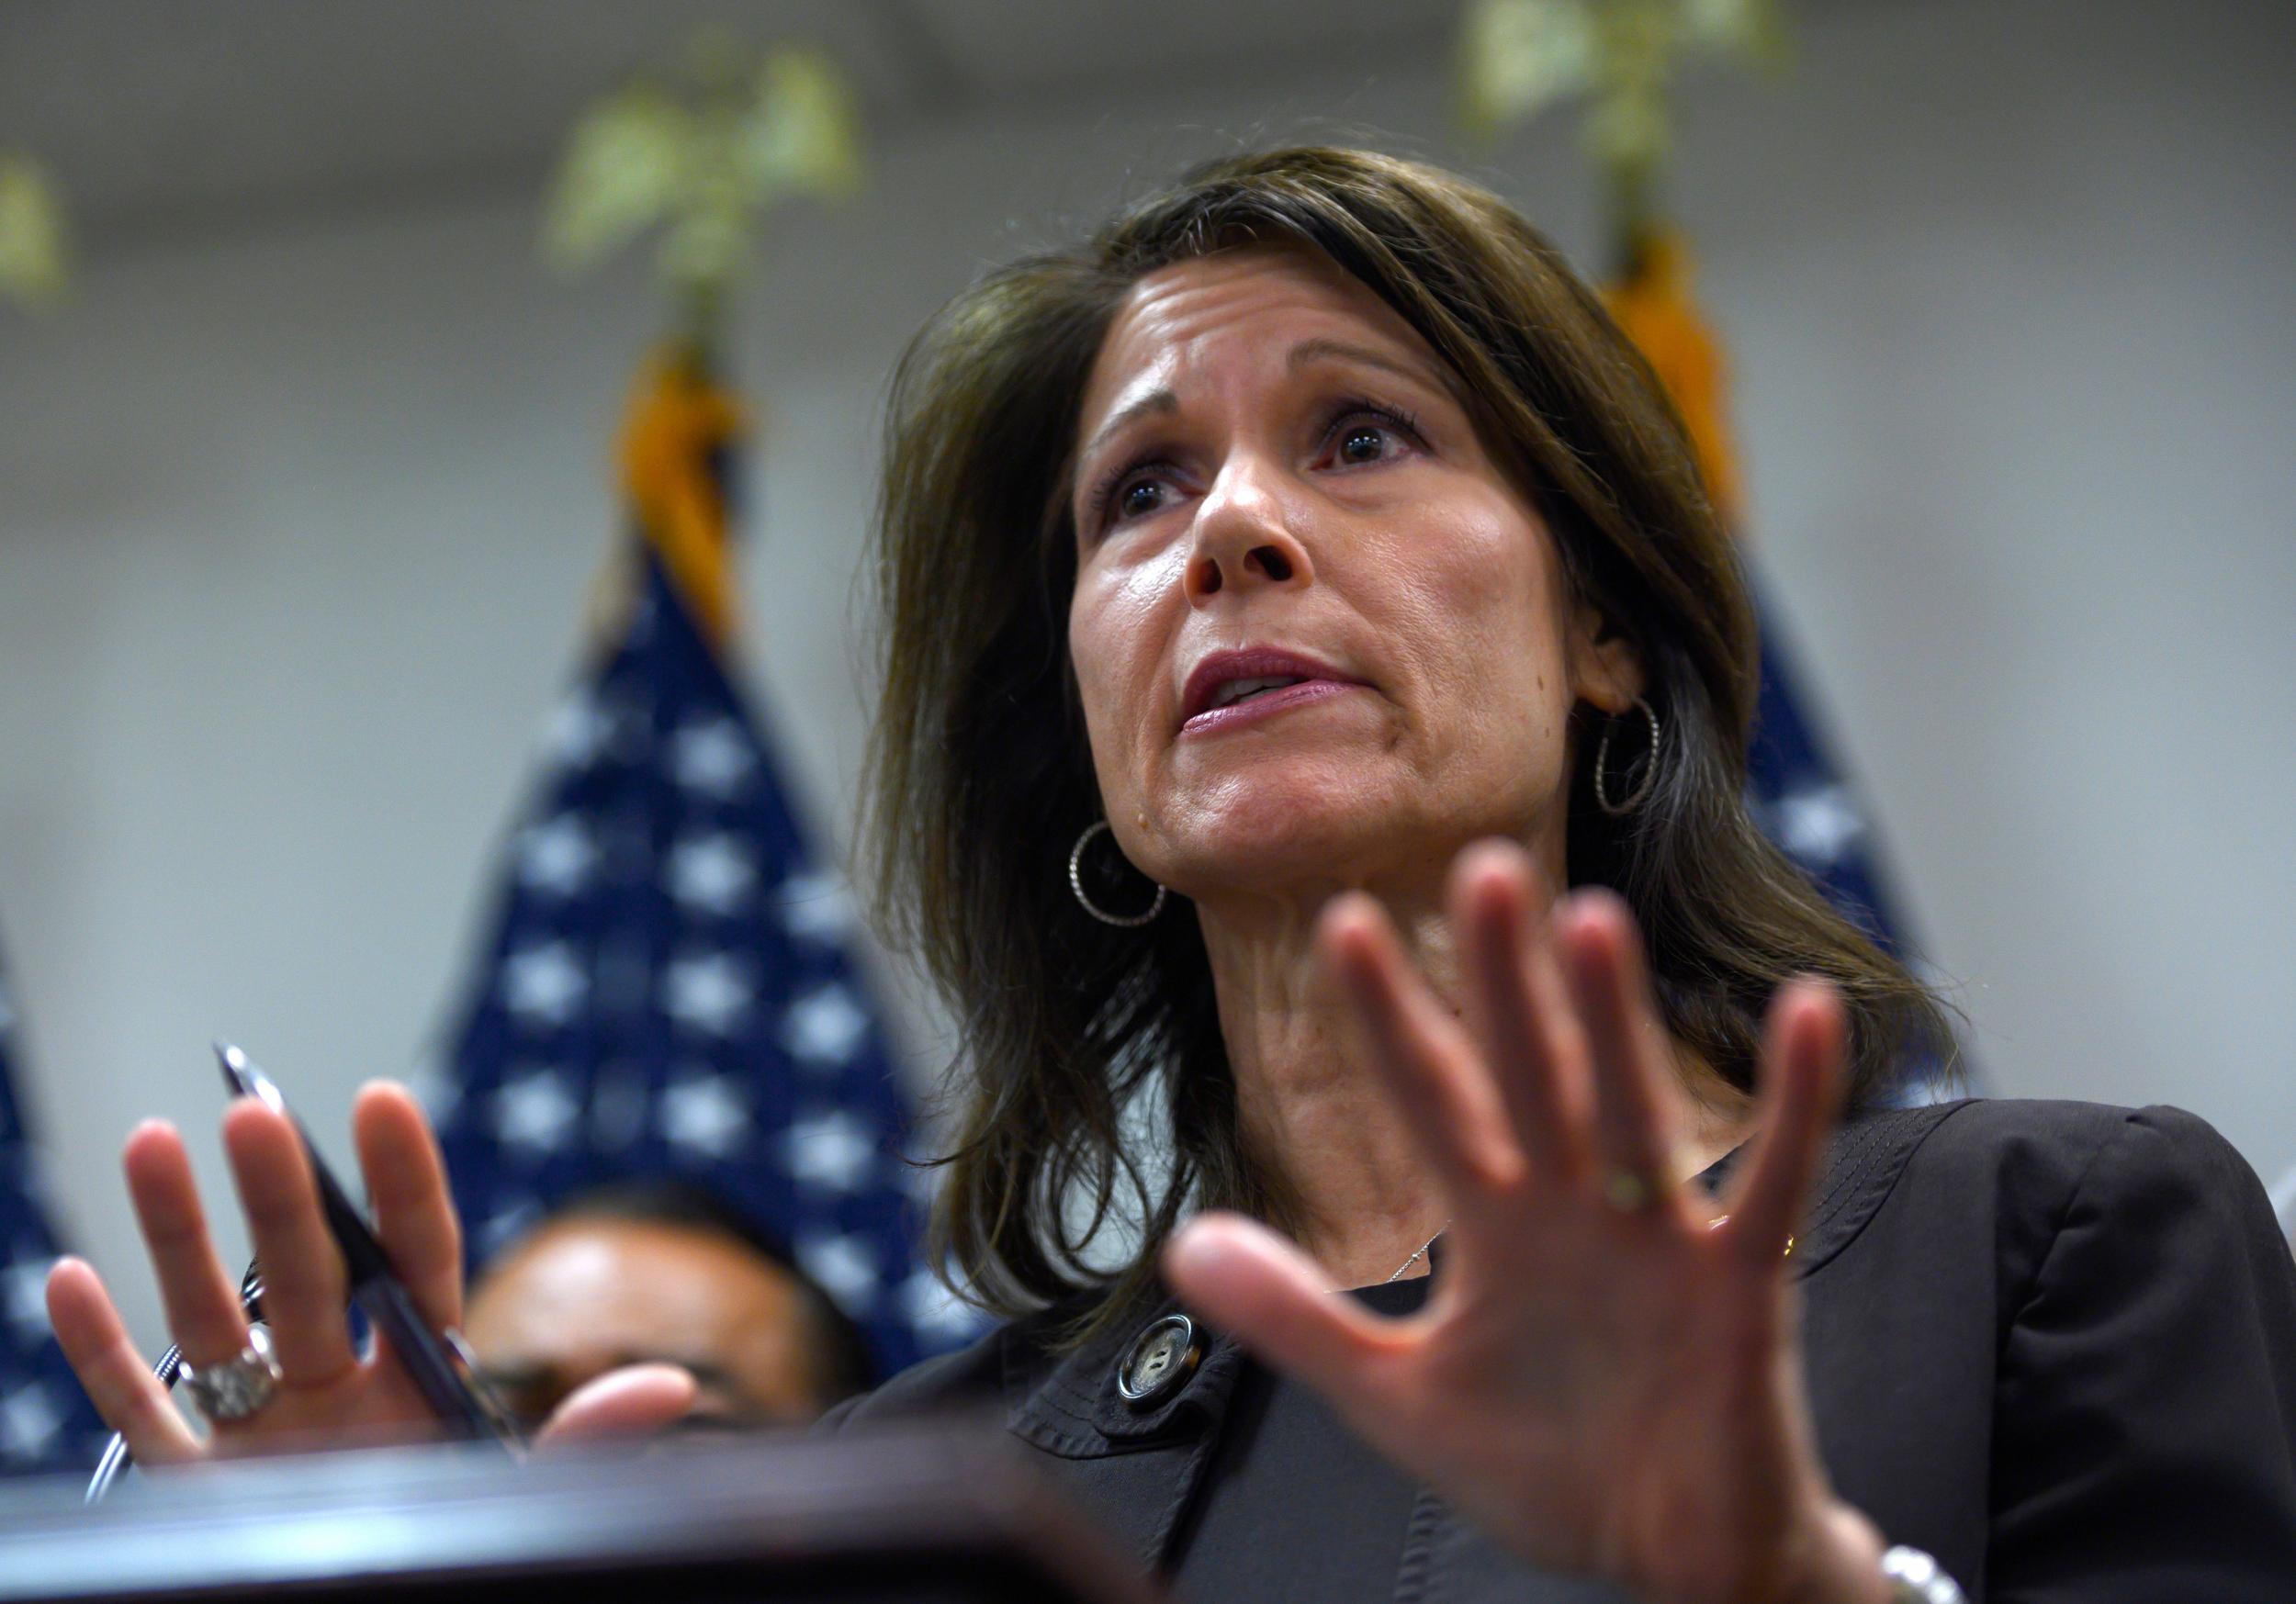 Cheri Bustos has often pitched herself as a bridge between different wings of her party